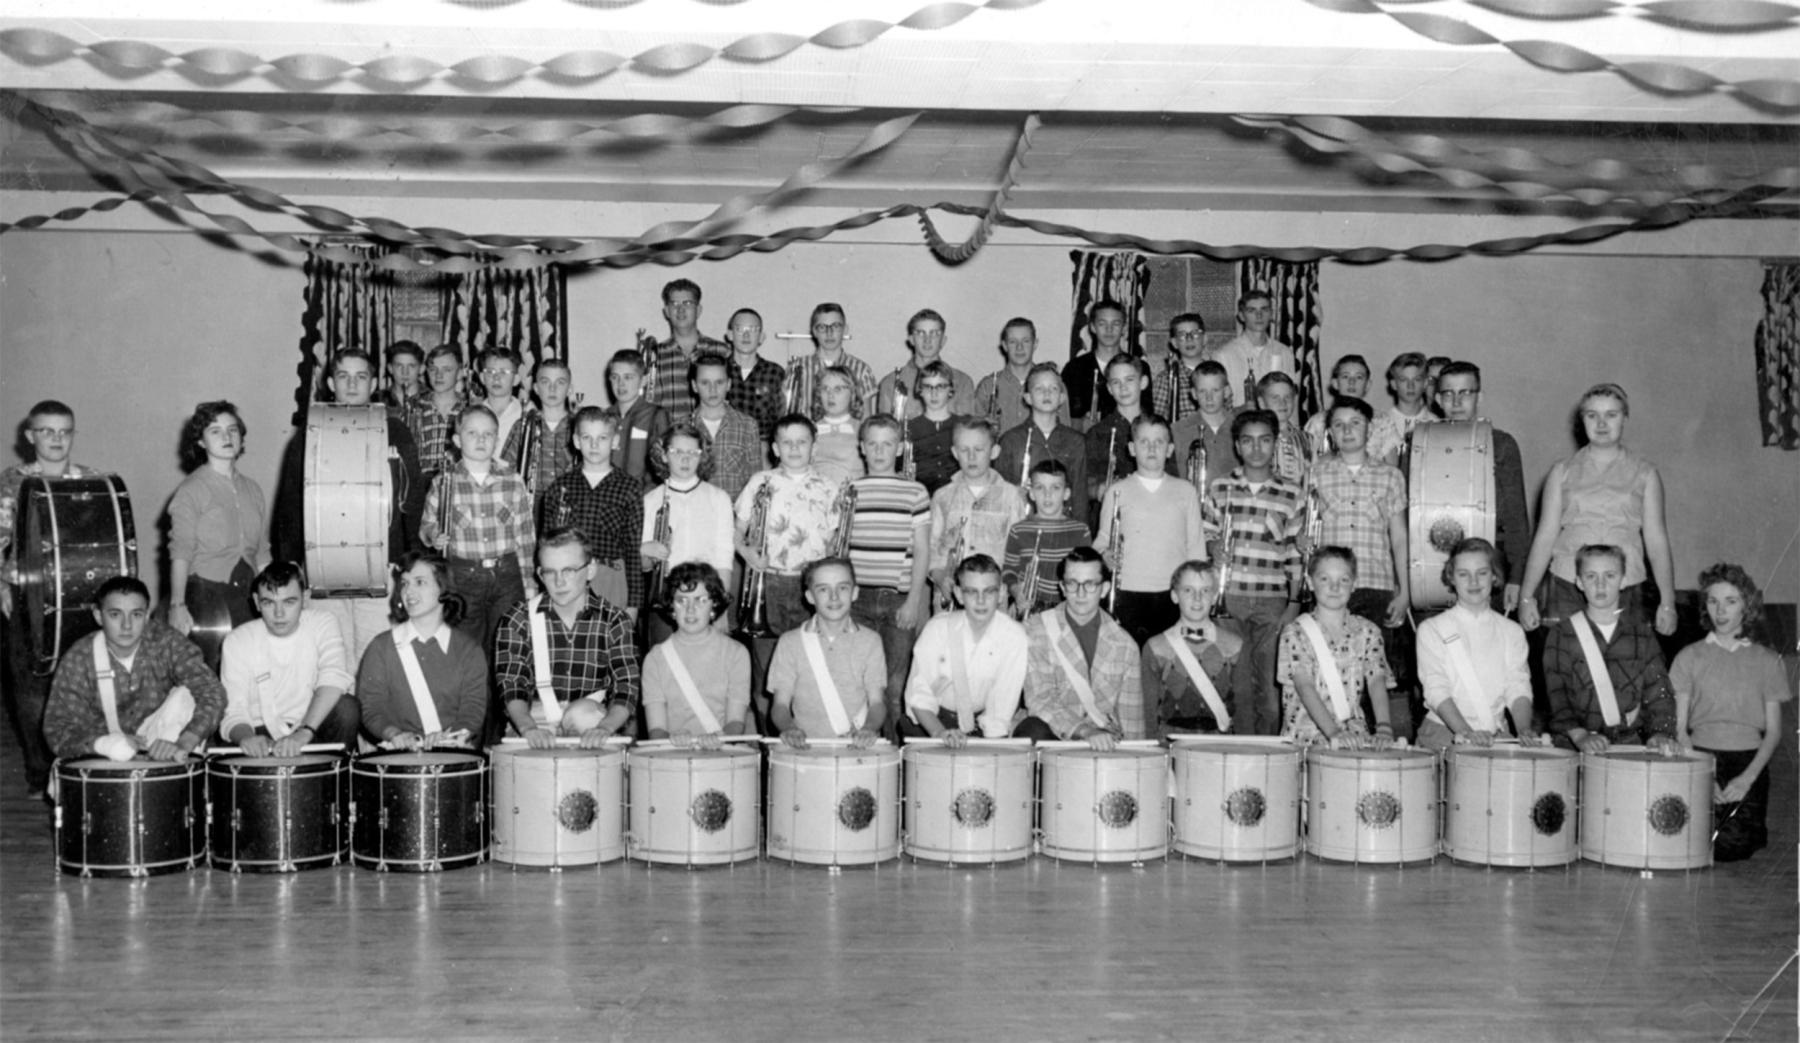 The Dec. 17, 1957 Casper Morning Star titled this photo “Troopers at Rehearsal” at the American Legion hall on Durbin Street. "The group will adopt old cavalry uniforms.” The caption noted, " and have a color guard of Indian princesses. Their tunes will range from the Western to popular. Support of the group is expected to come from several Casper organizations who will be represented in the color guard.” Troopers Archives #1787.